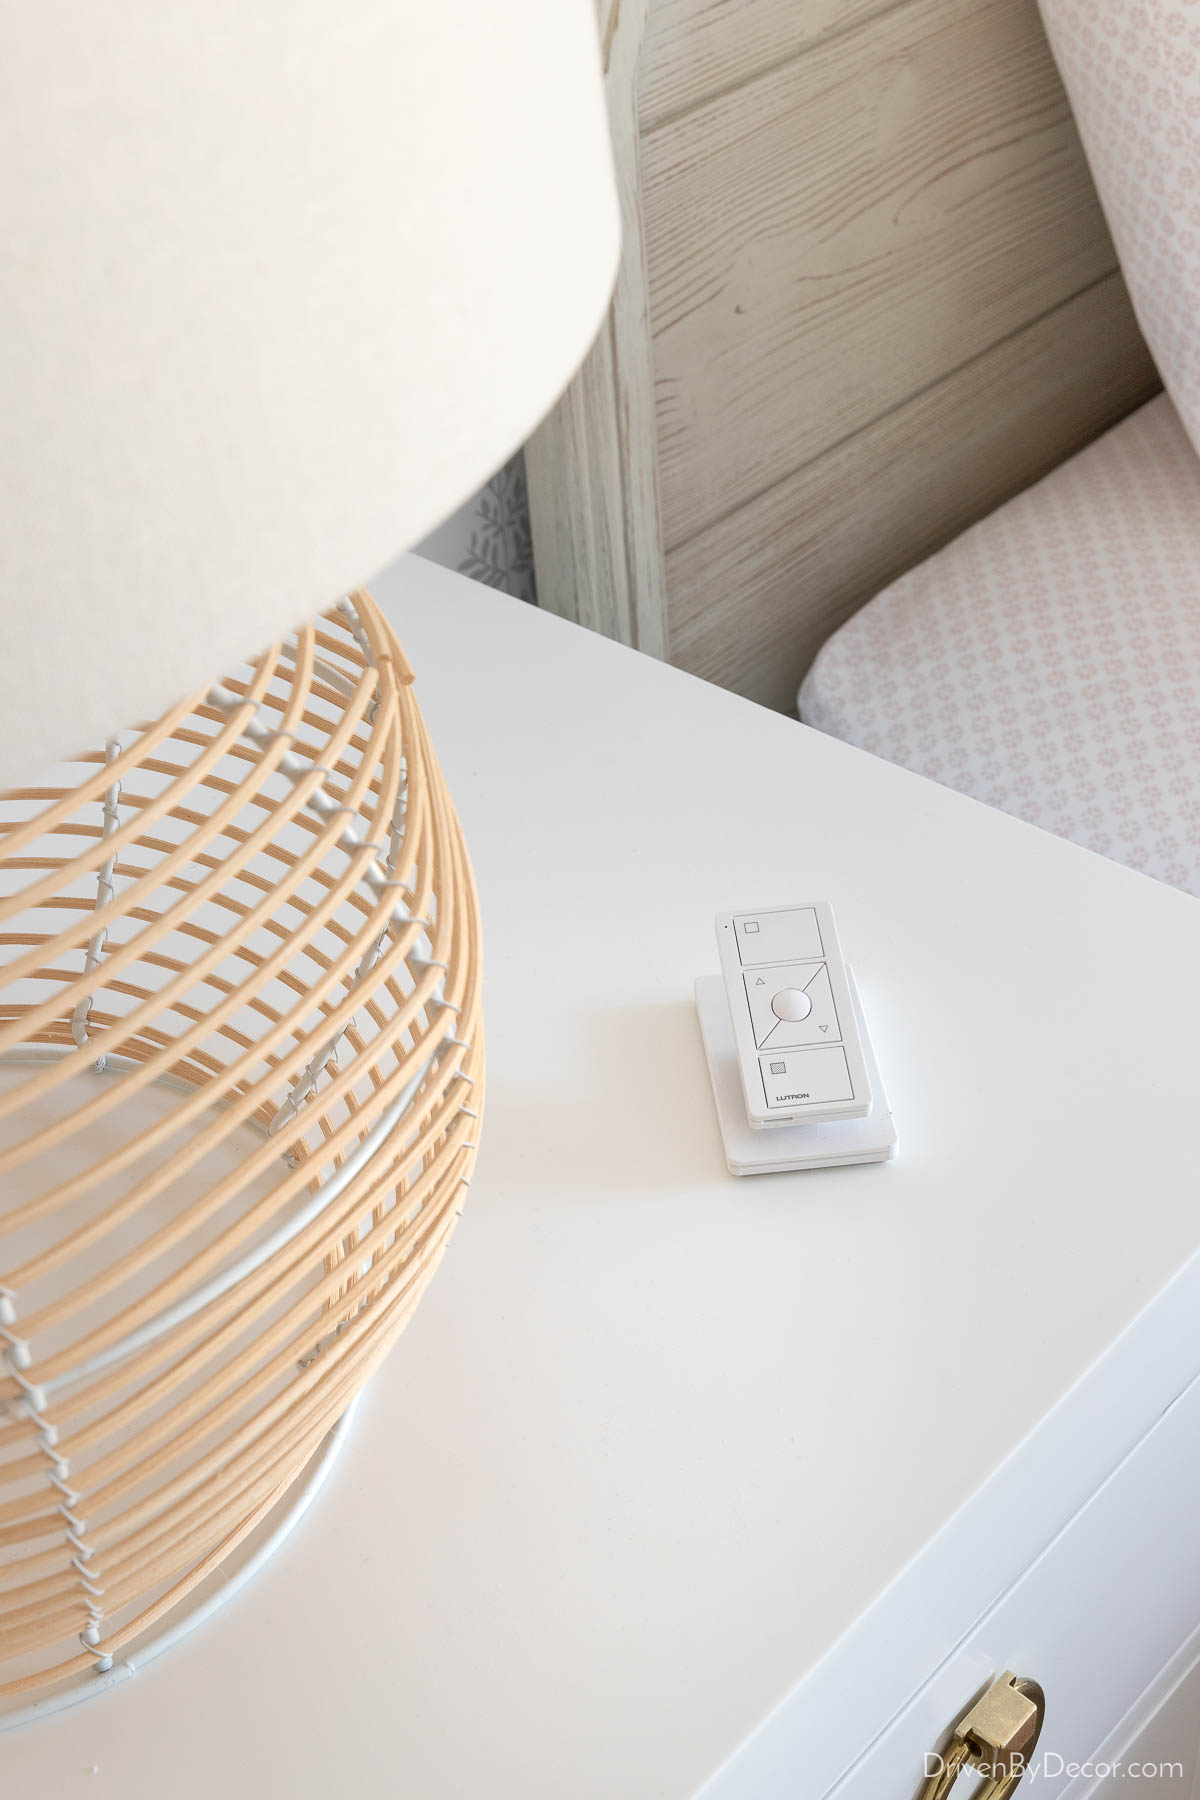 The Pico Smart Remote next to a lamp on a nightstand